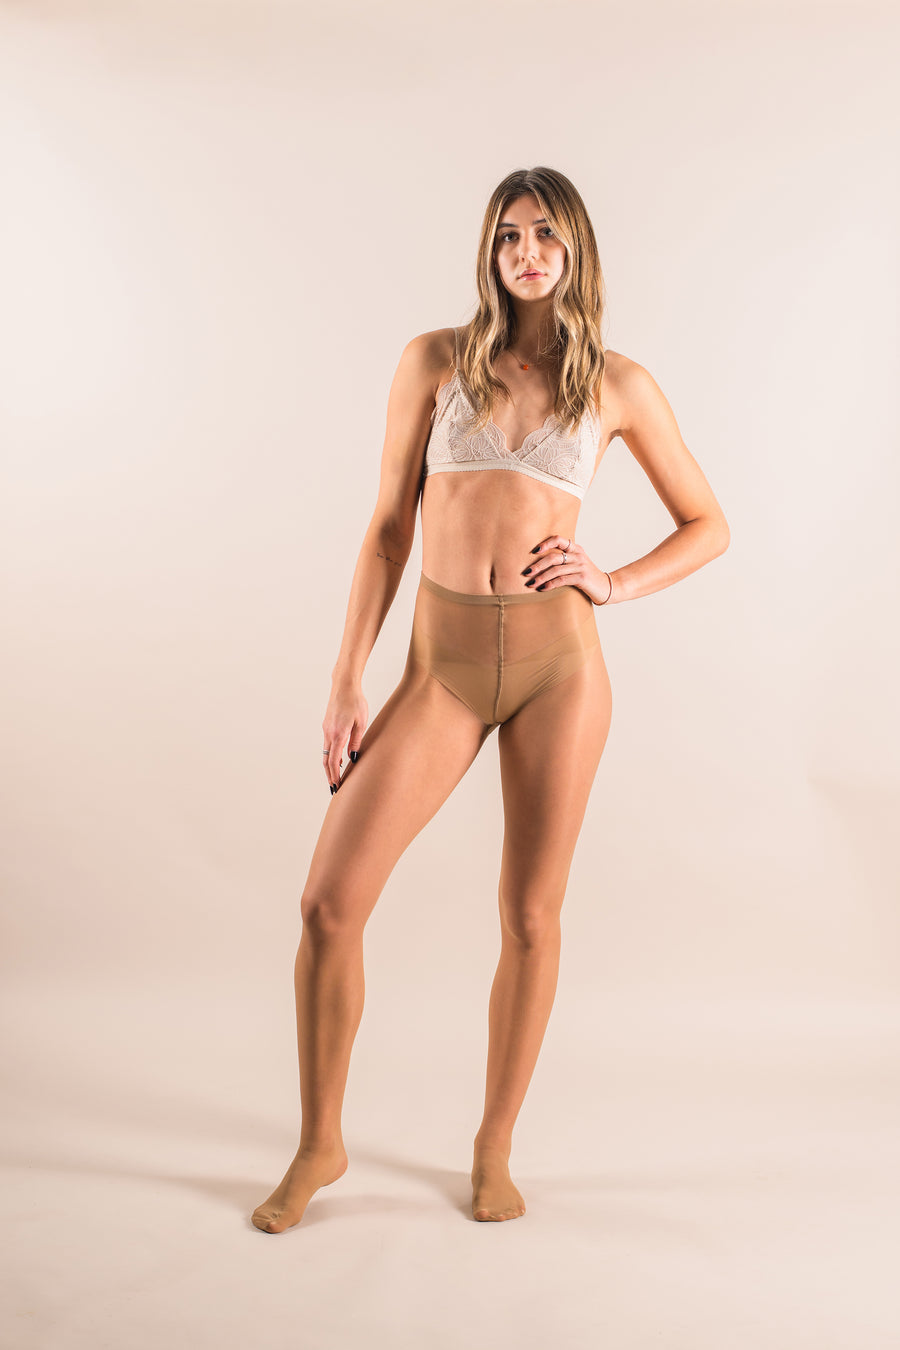 Copy of Sheer To Waist Tights - Tan, worn by model front view